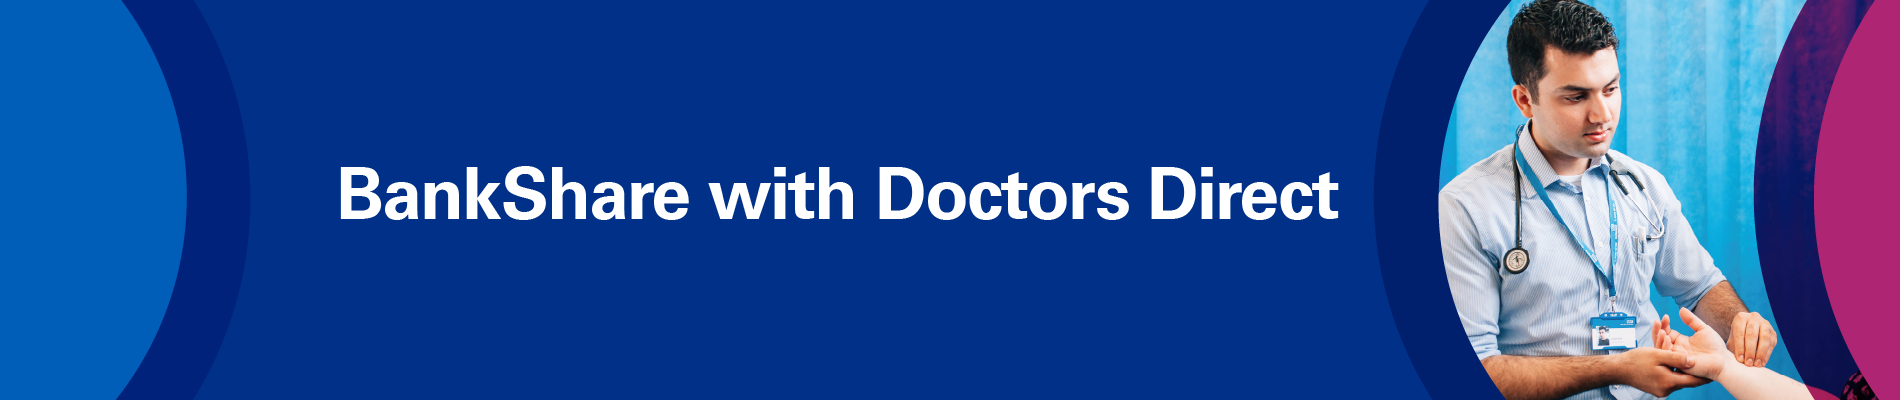 BankShare with Doctors Direct page banner